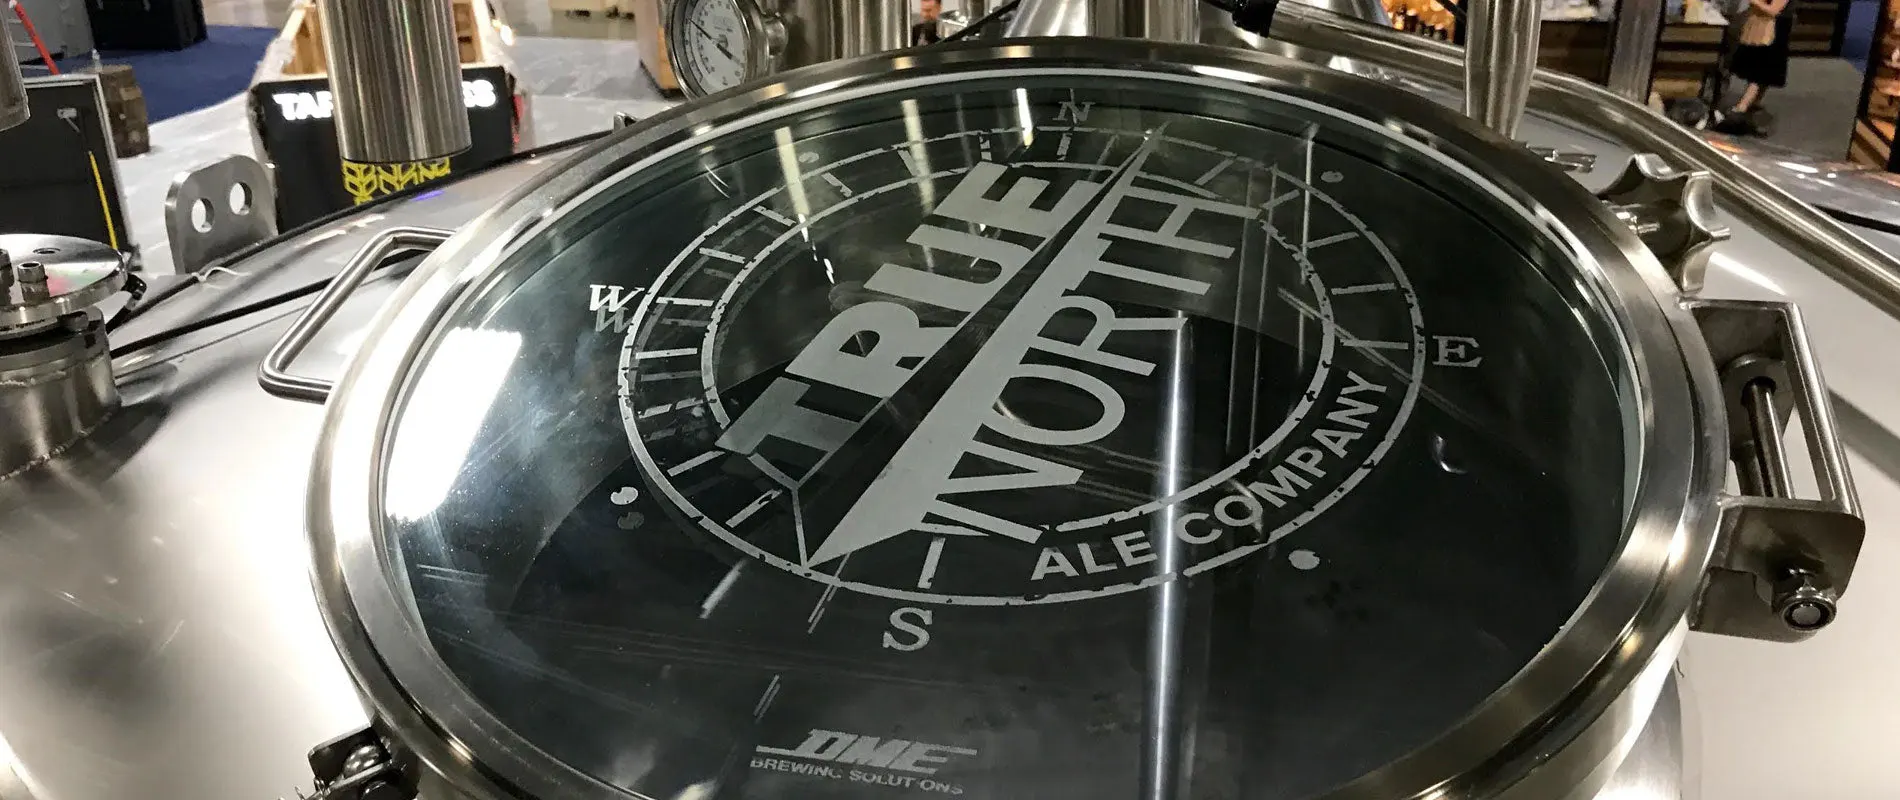 Honored to be selected as brewery equipment partner